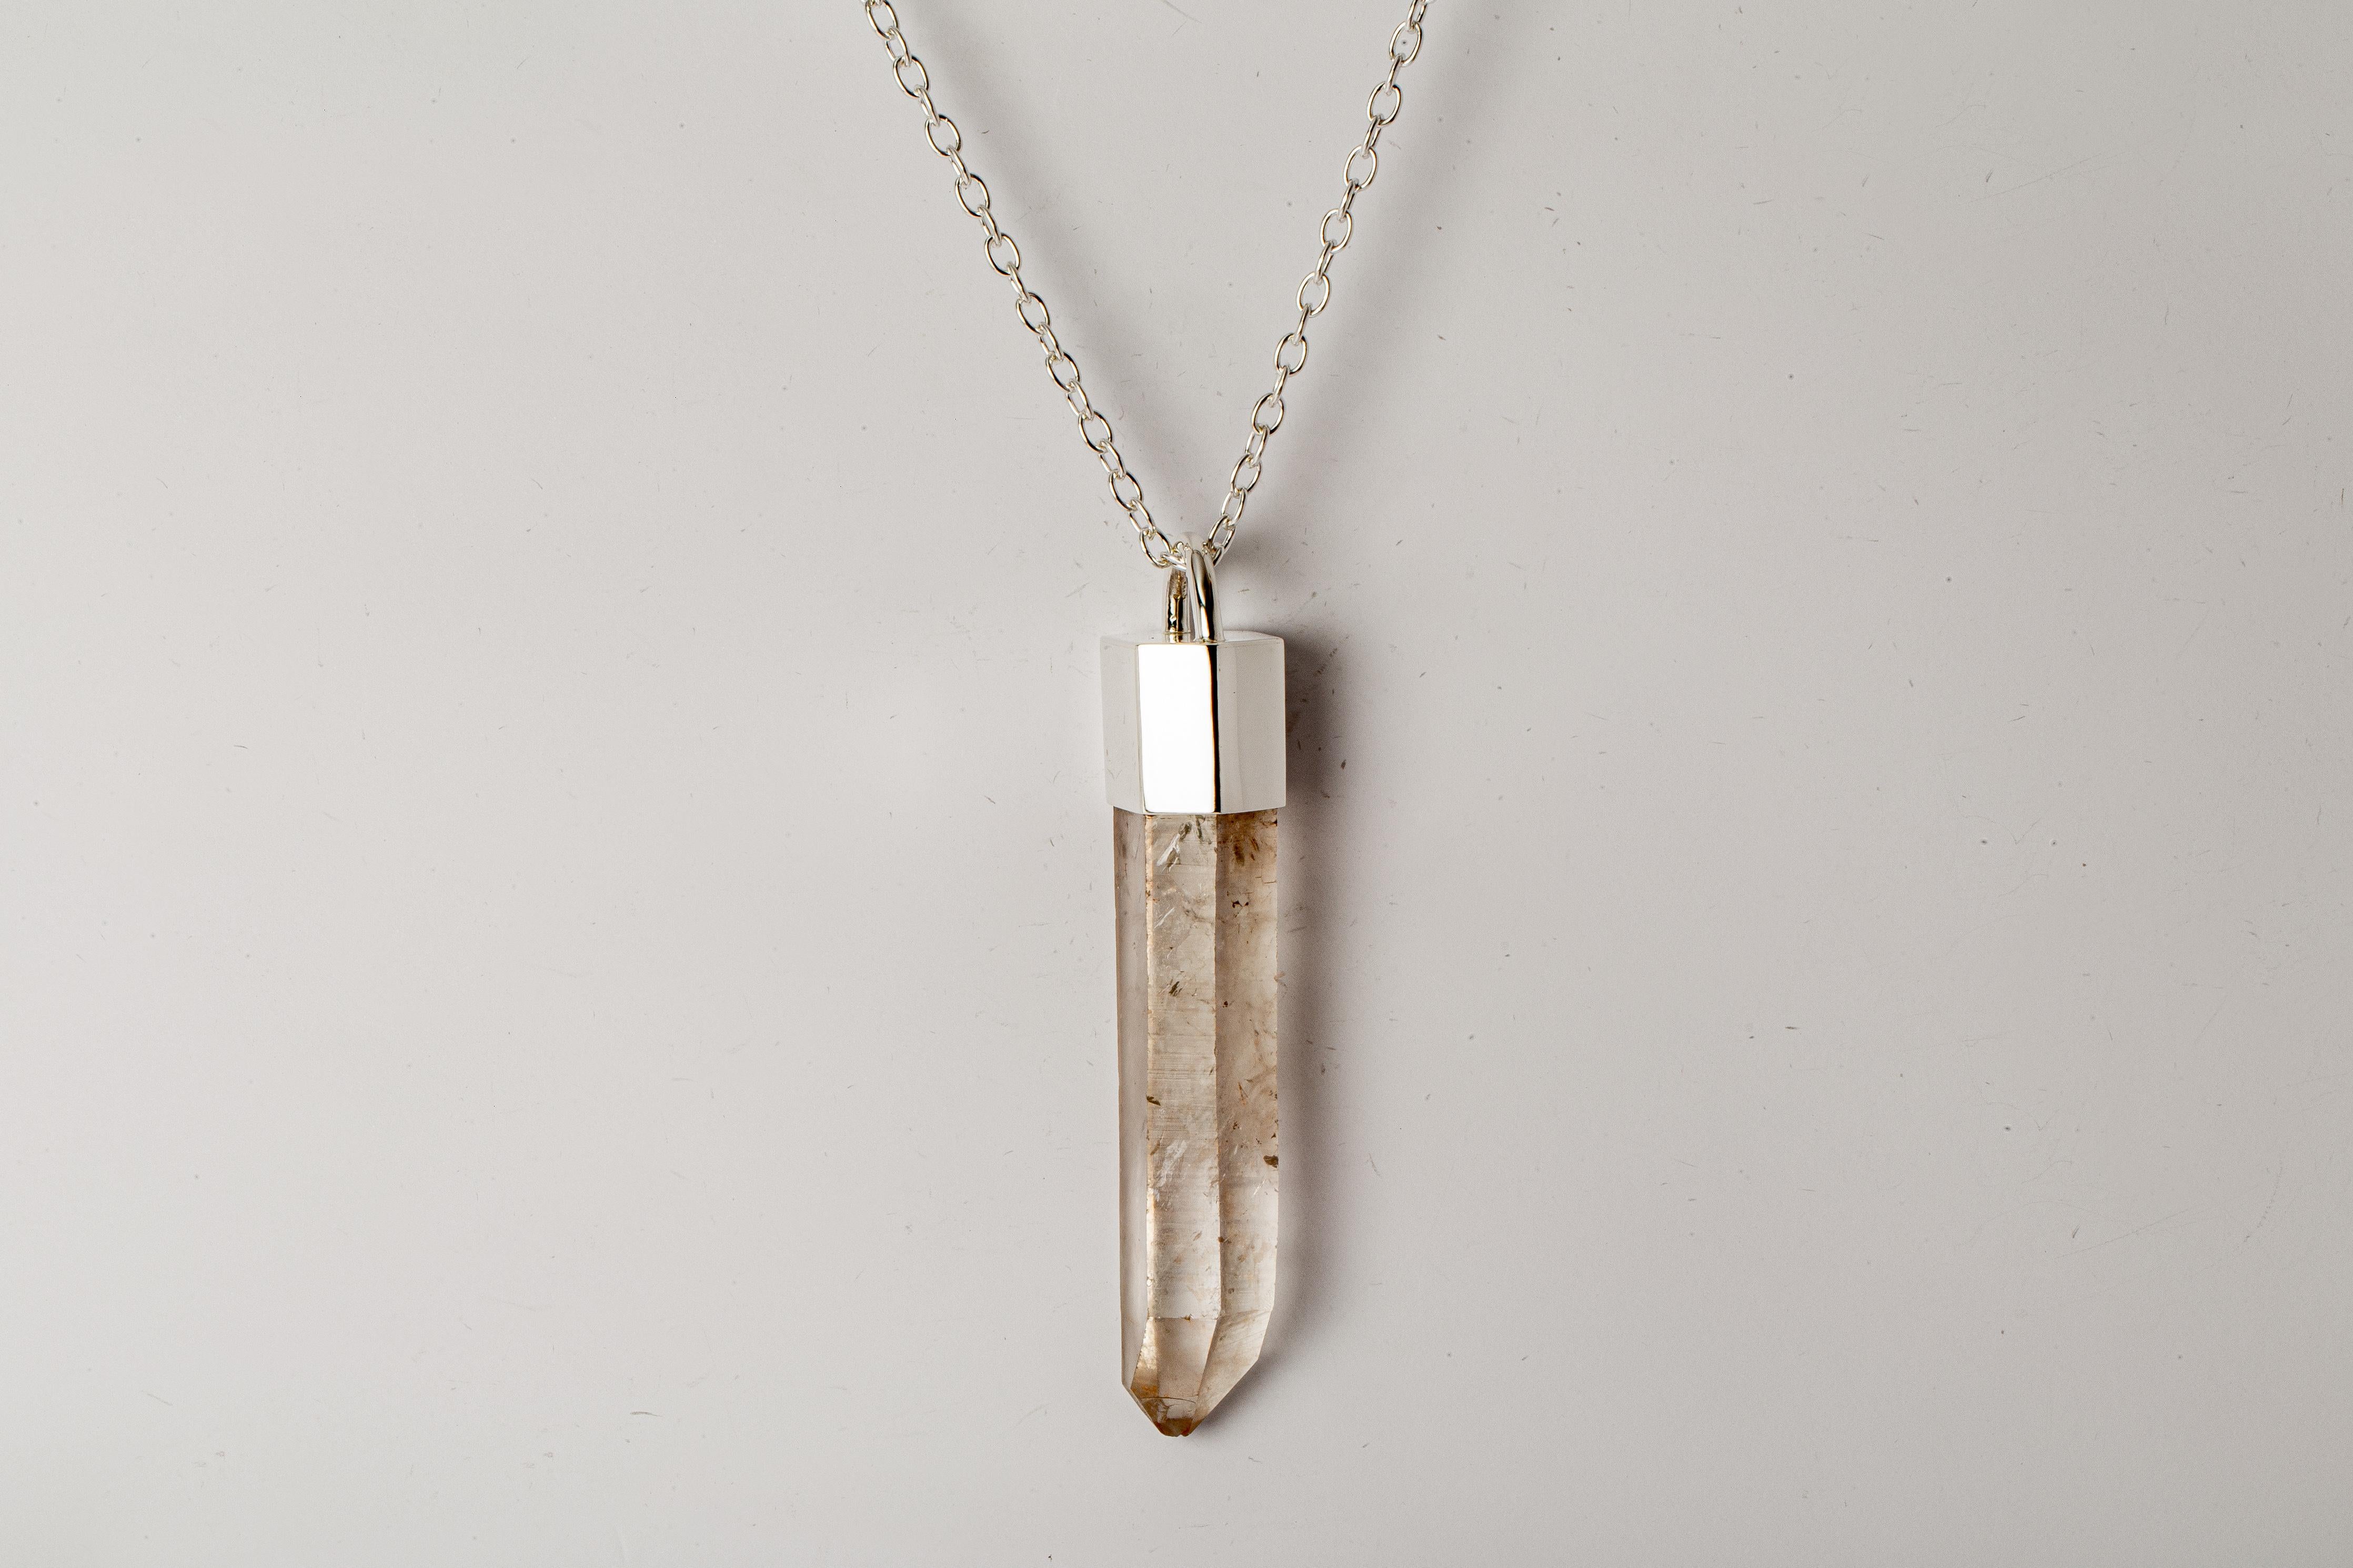 Necklace in polished sterling silver and rough of lemurian quartz. The Talisman series is an exploration into the power of natural crystals. Tools for Magic. The crystals used in these pieces are discovered through adventure and are hand selected.